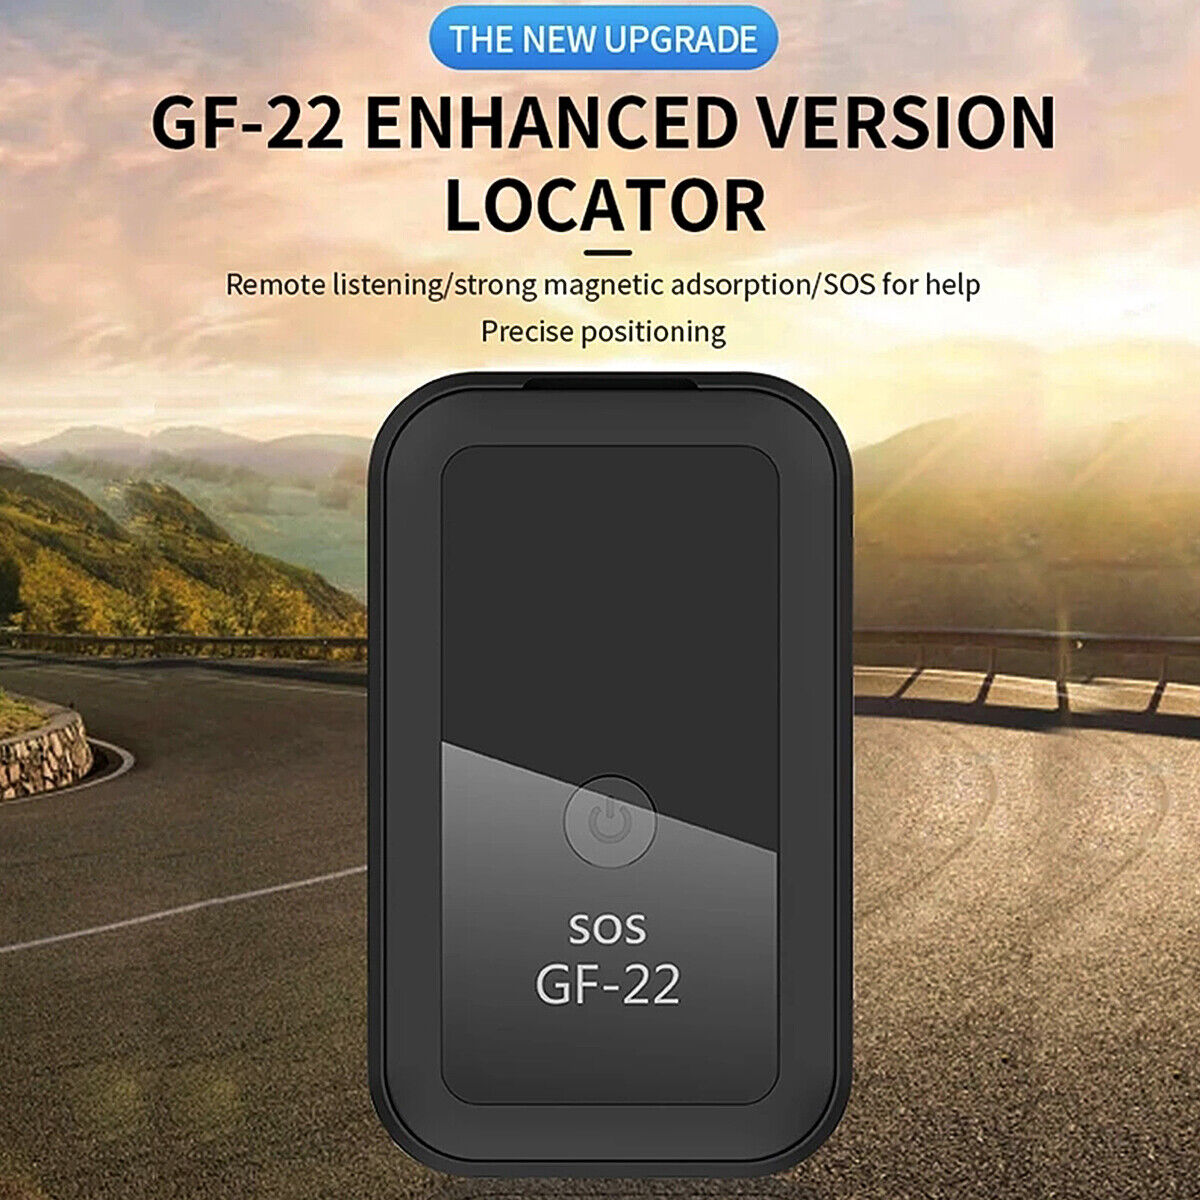 GPS Tracker with Audio: Enhance your Security & Safety